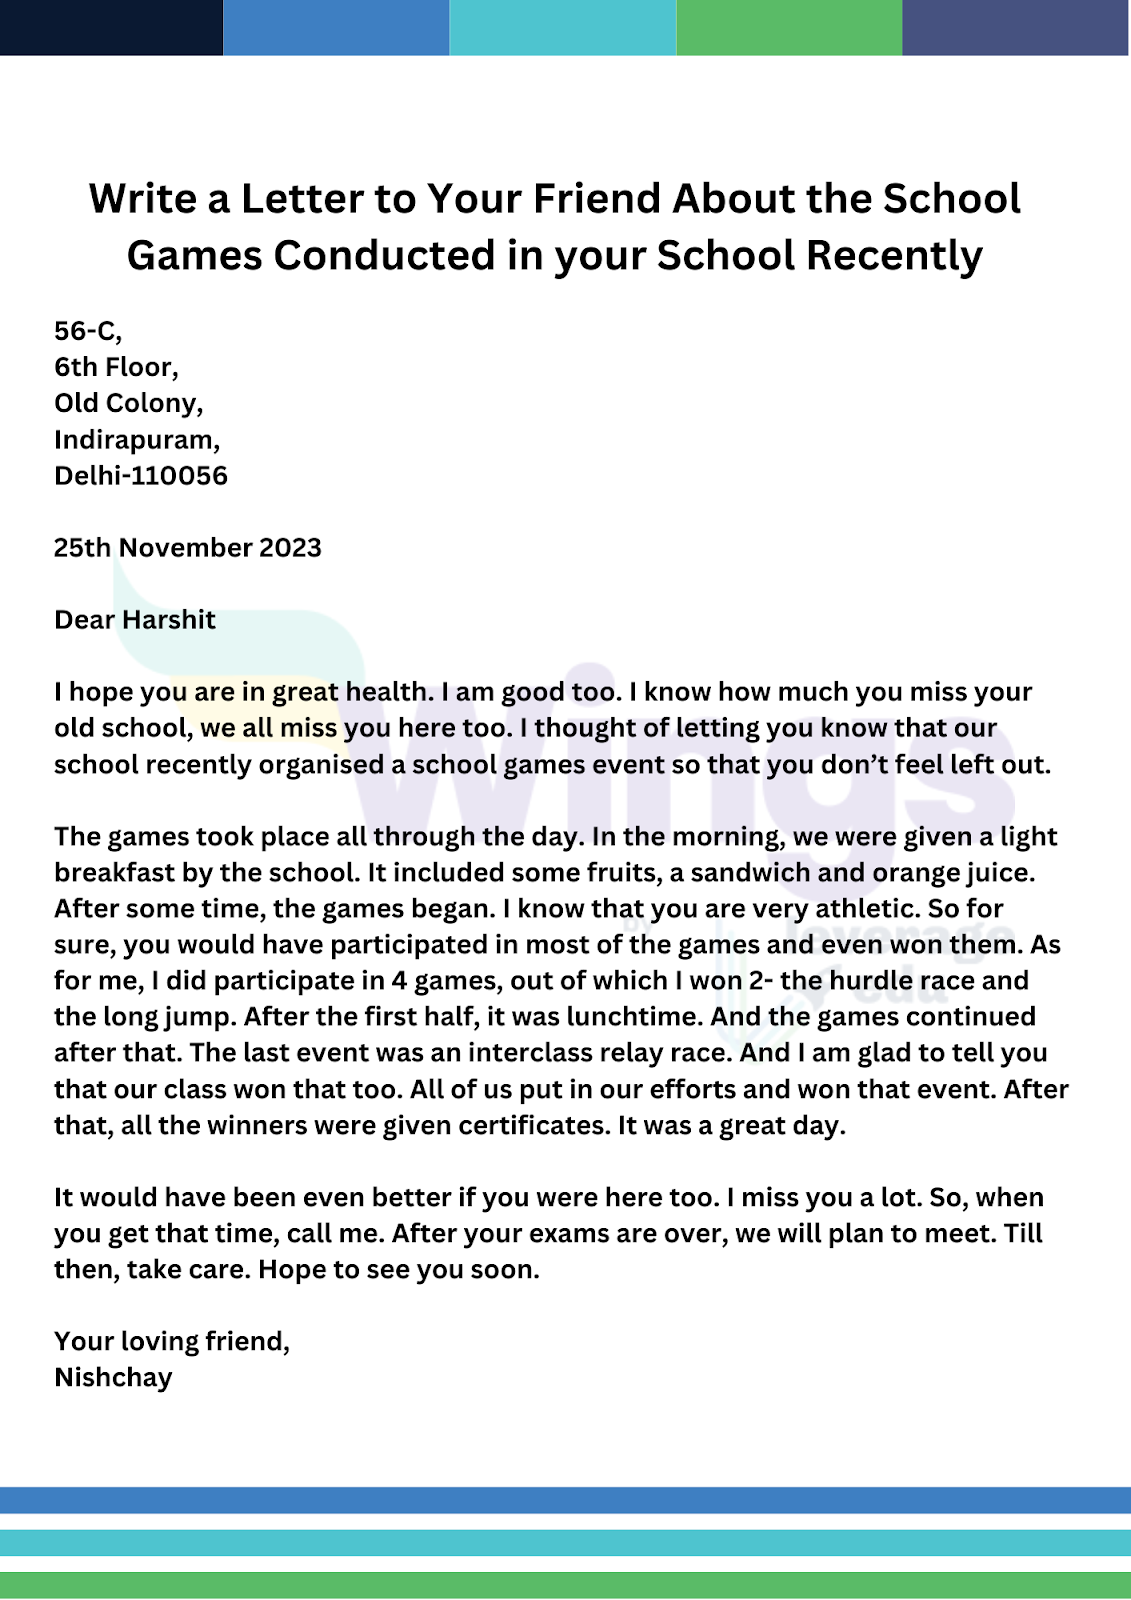 Write a Letter to Your Friend About the School Games Conducted in your School Recently